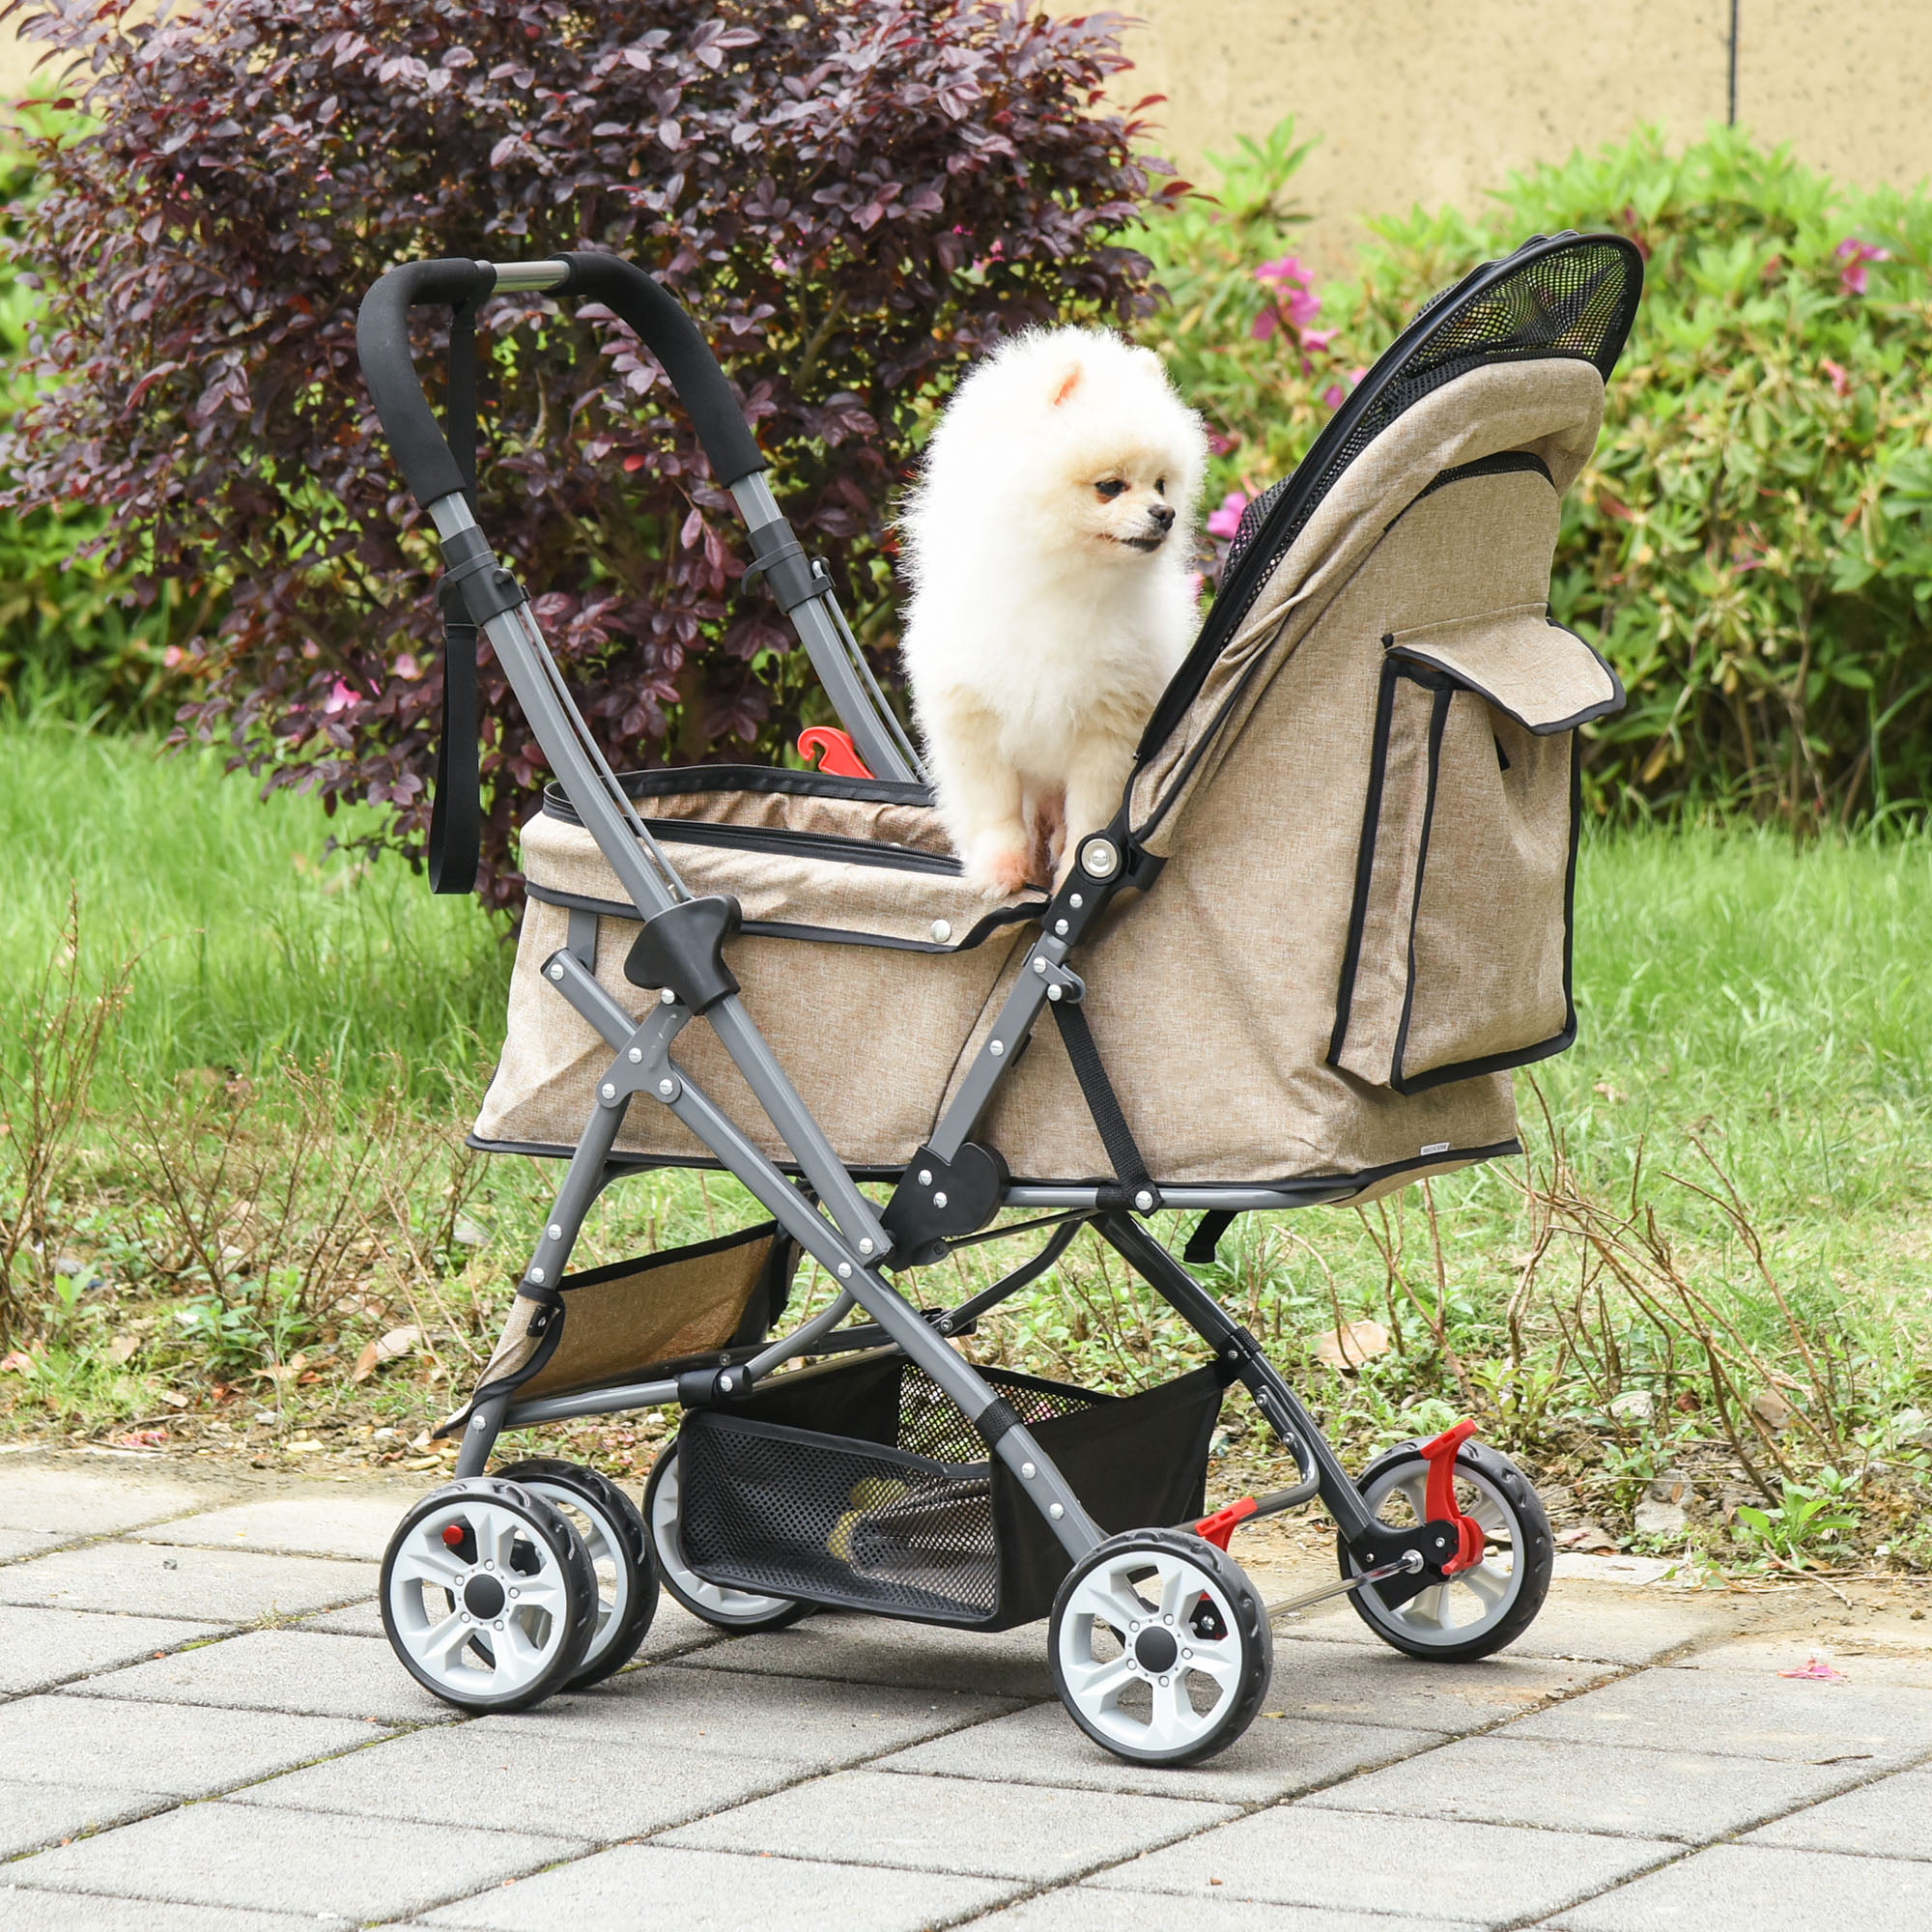 Dog Pet Cat Stroller CL.Store Dog Stroller Pet Cat 4 Wheels Folding with Cup Holder Durable Waterproof Strollers Portable Travel Strolling Cart wZippered Mesh Windows & Pad Canopy,Teal